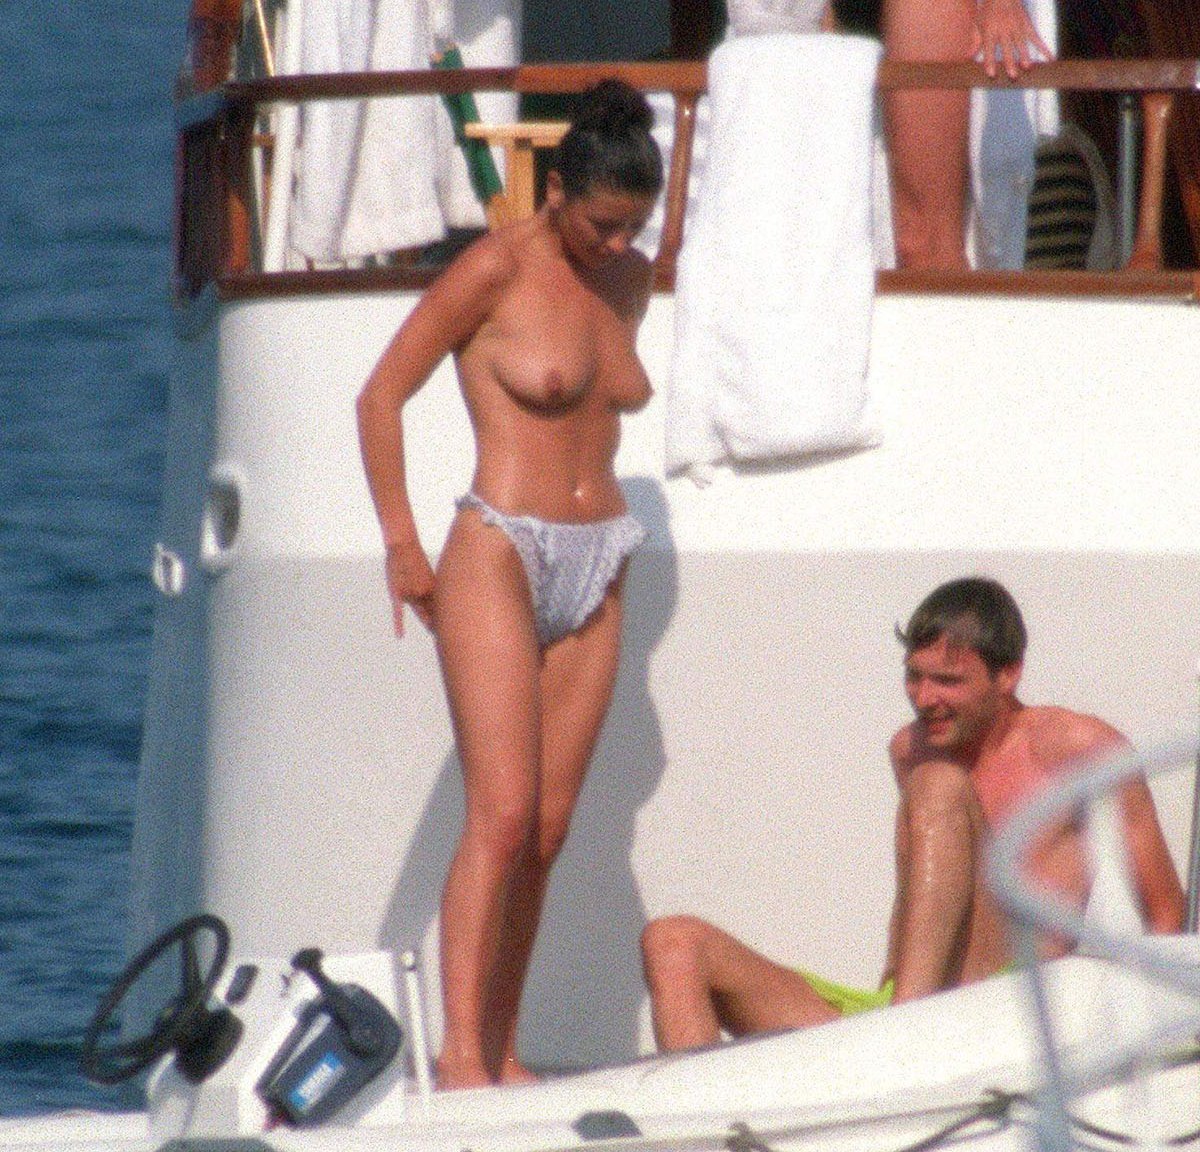 Lifestyles of the Nude and Famous: More Catherine Zeta Jones!